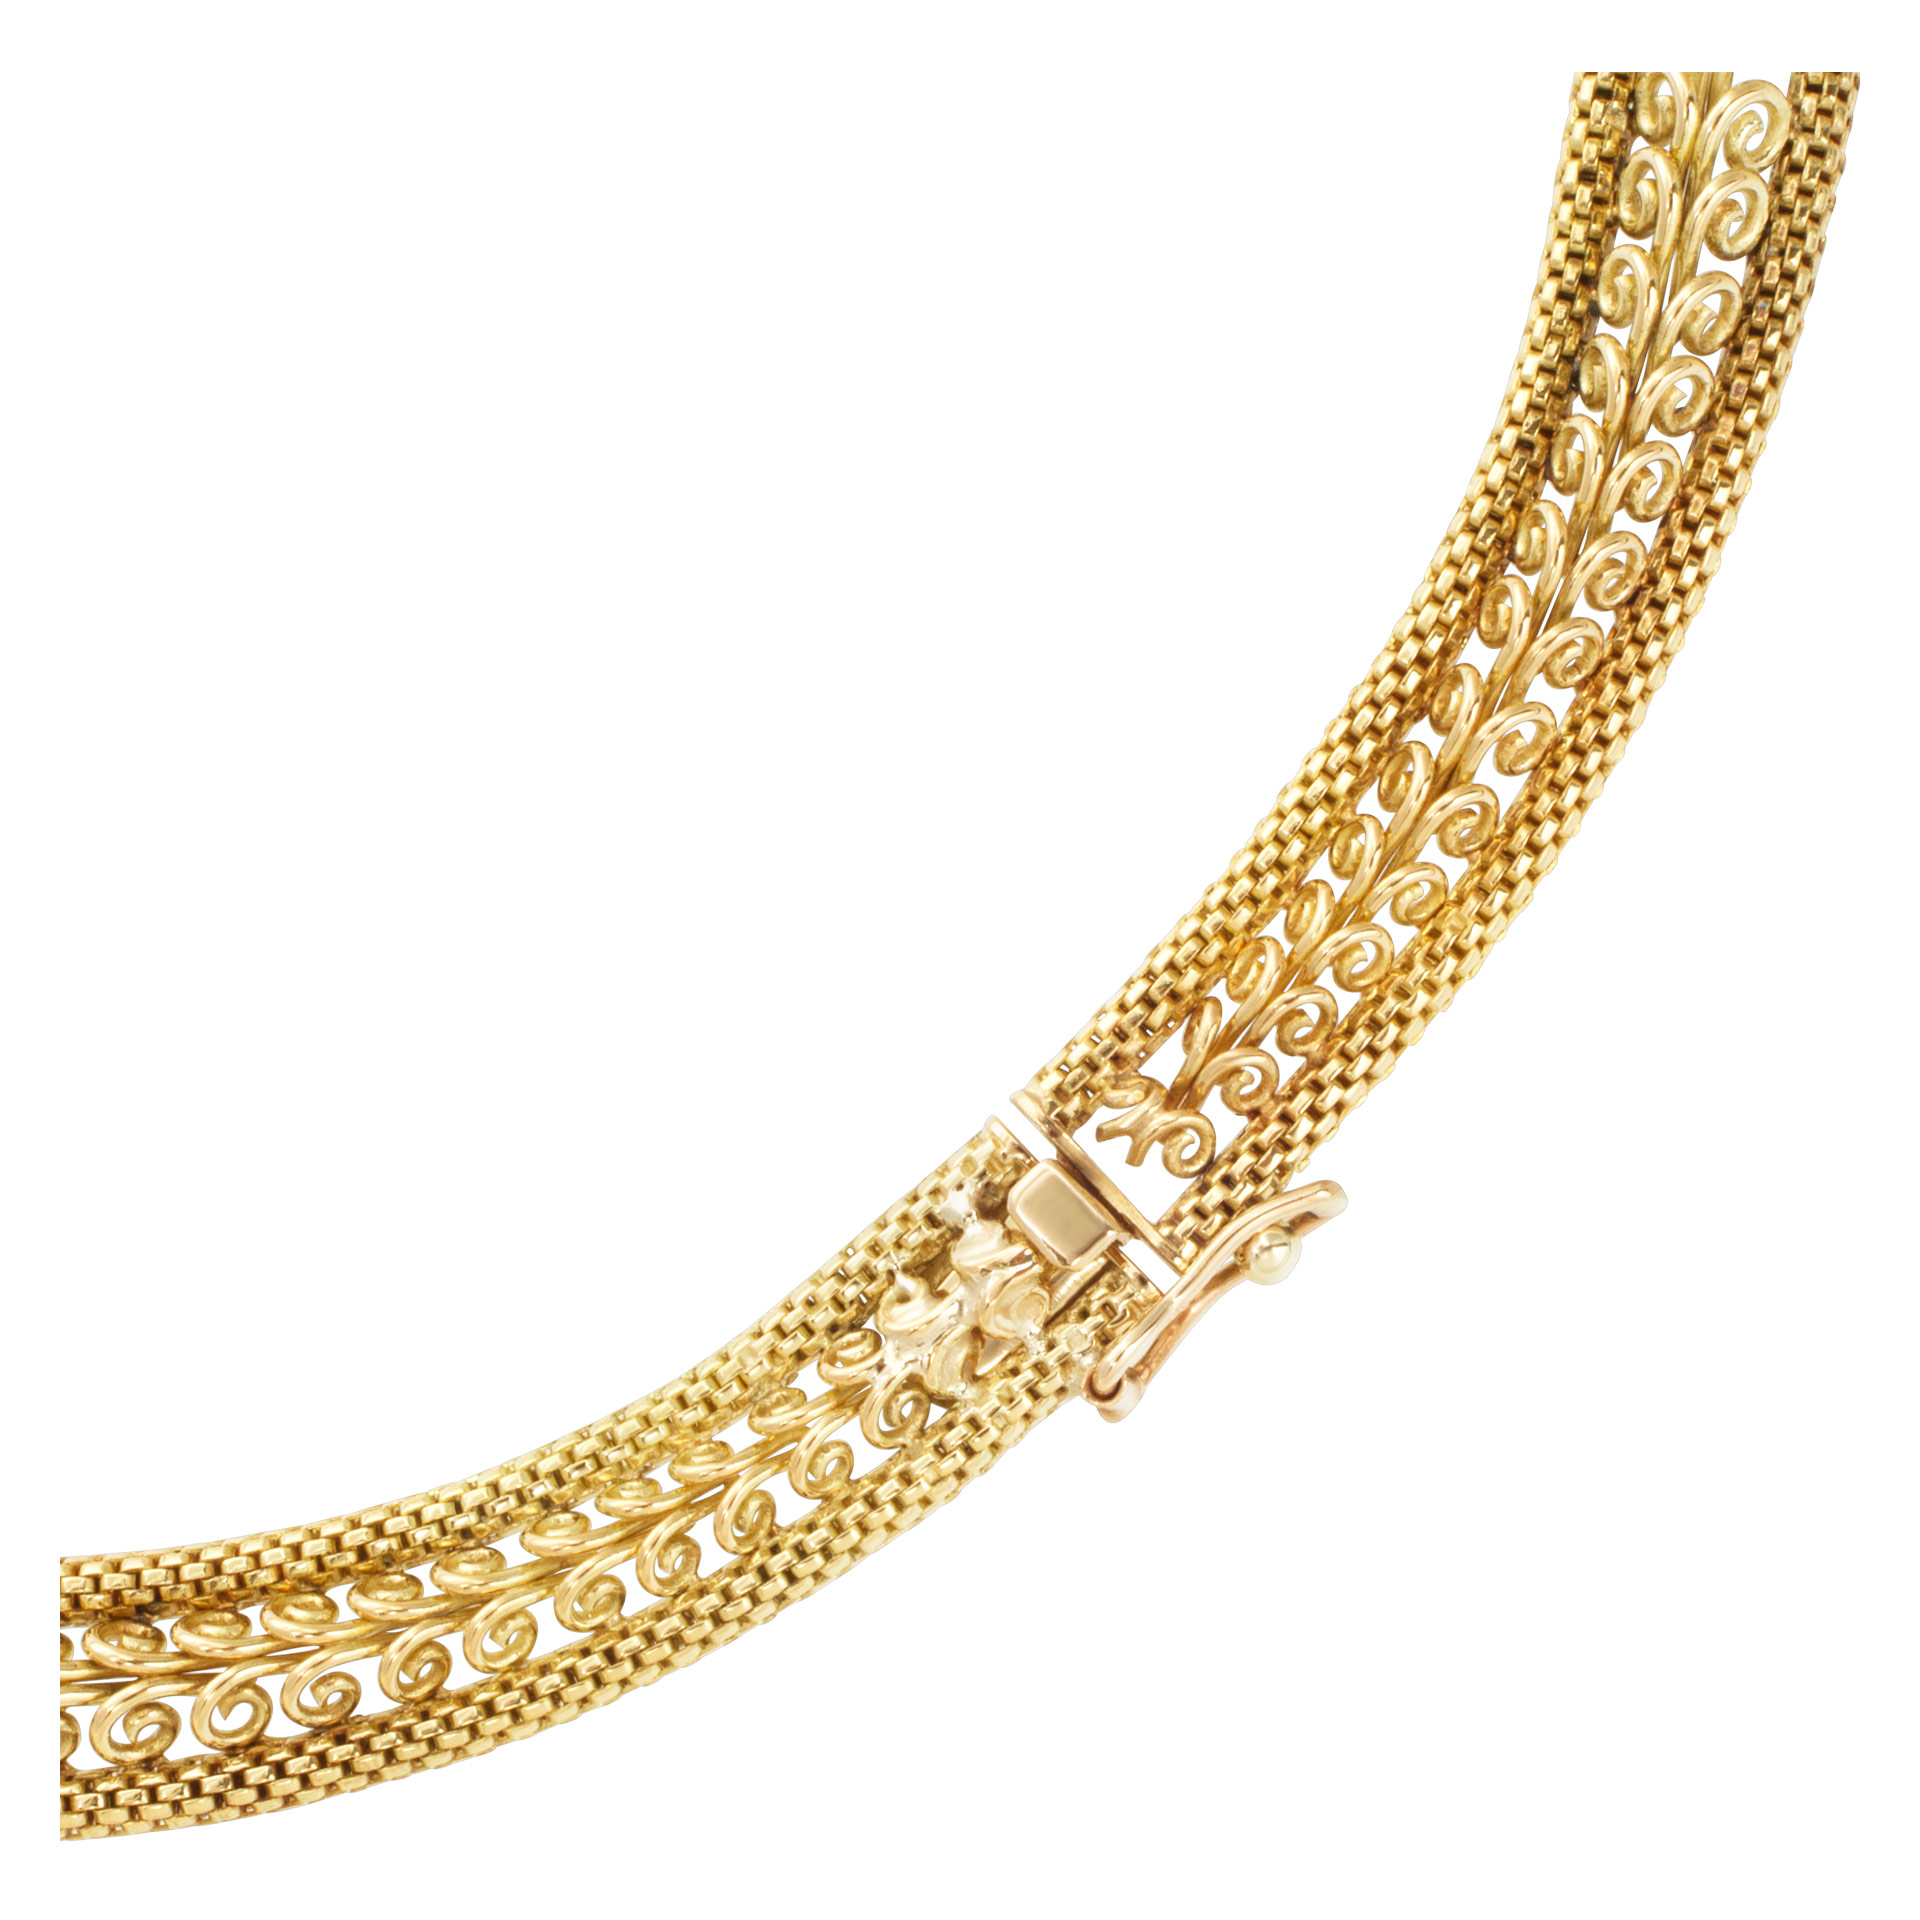 Swirl link choker necklace with diamond accents in 18k (Stones) image 5